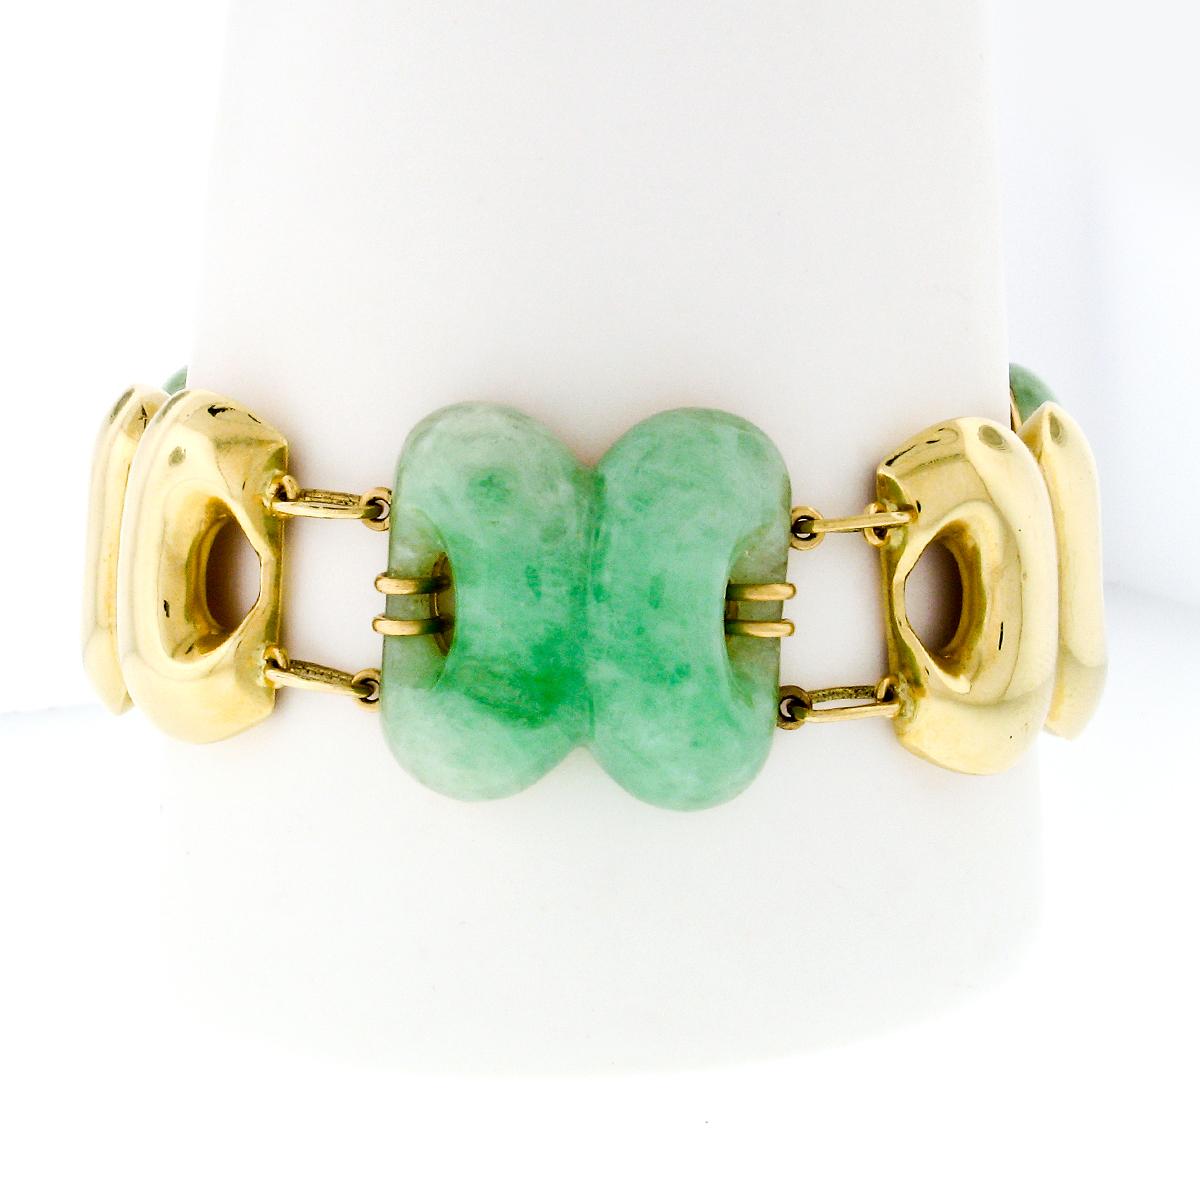 This bold vintage bracelet was crafted from solid 14k yellow gold and features alternating pierced jade and 14k yellow gold links. Both the jade stones and the gold links have the same dual ring design. Each of the jade stones is securely prong set